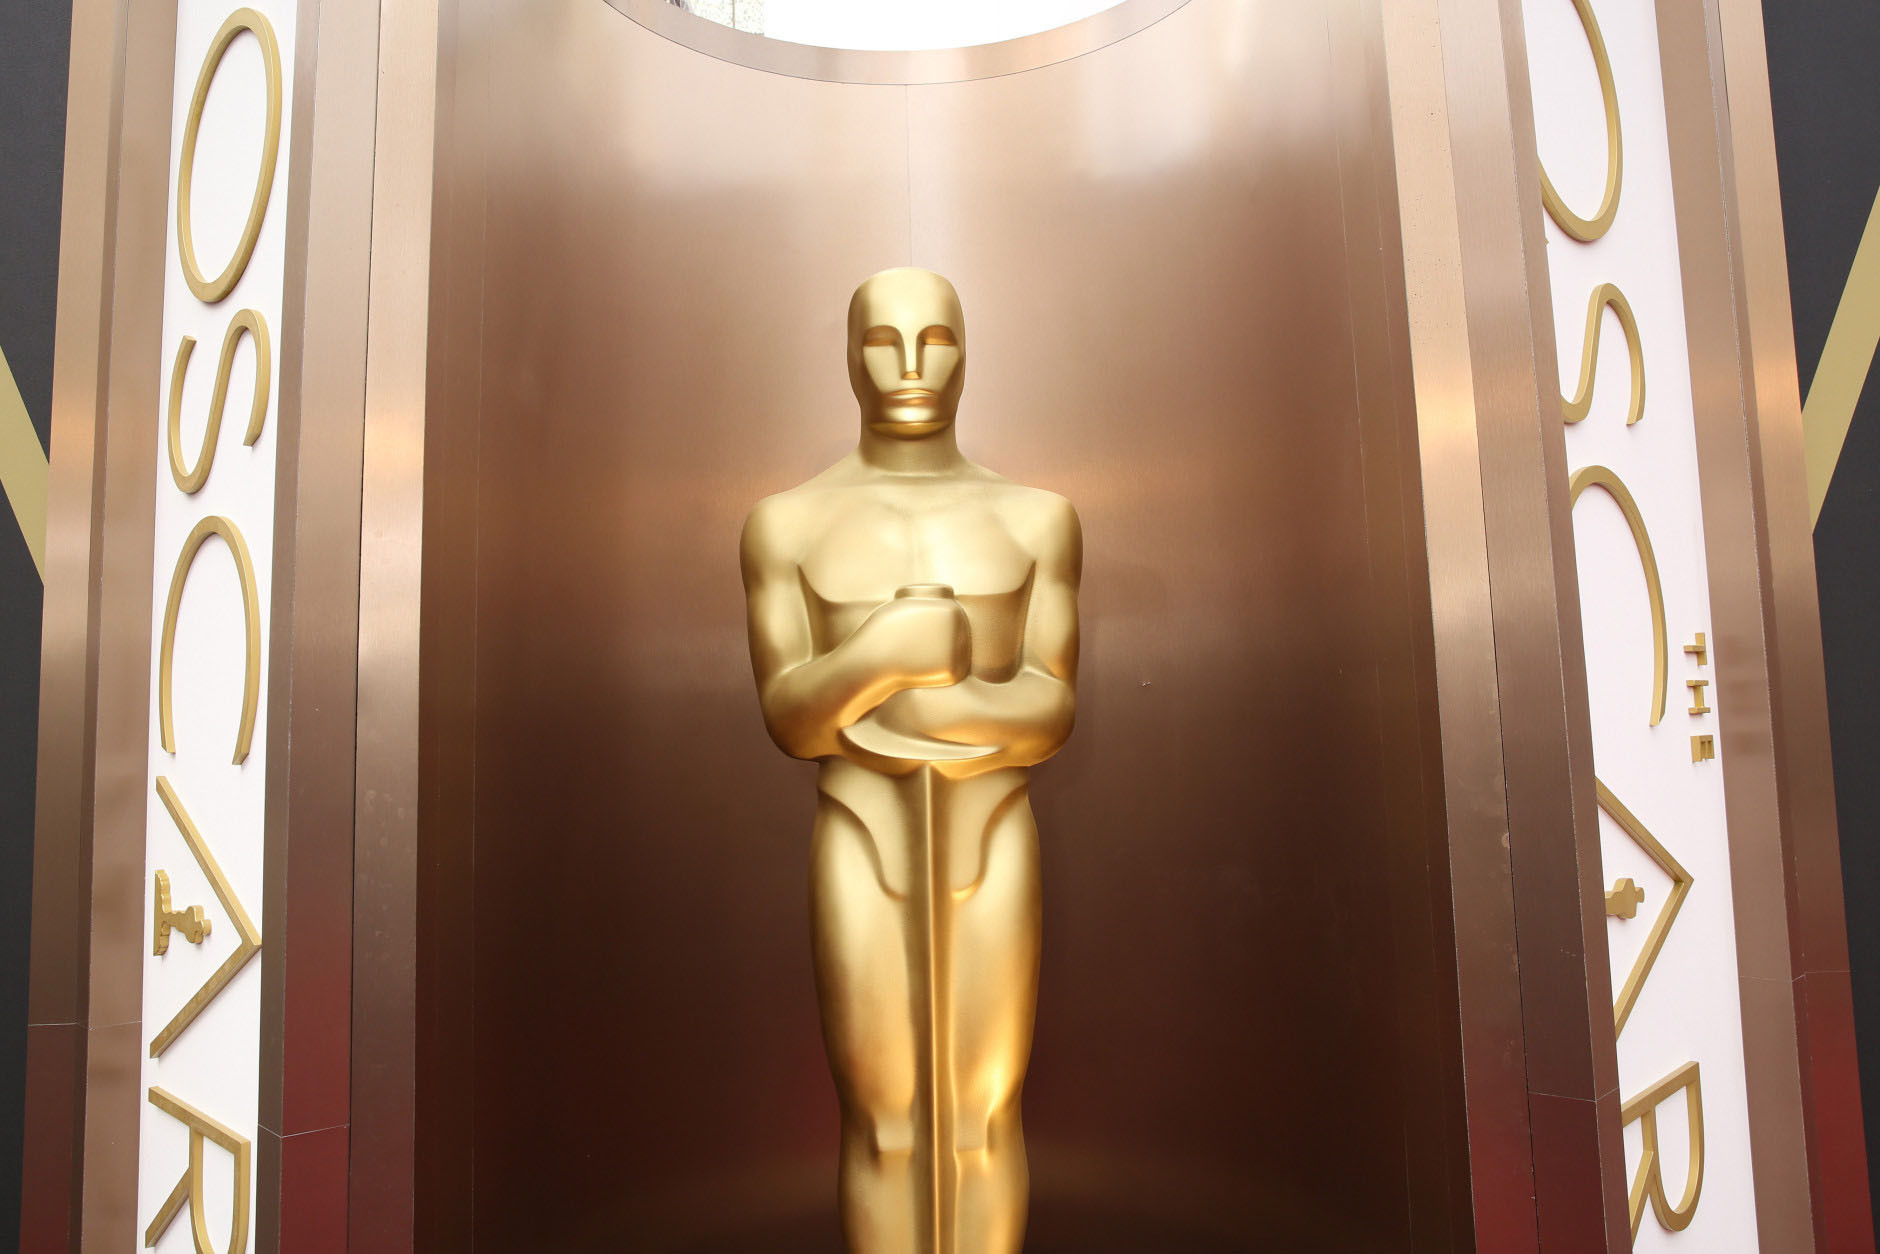 FILE - In this March 2, 2014 file photo, an Oscar statue appears at the Oscars at the Dolby Theatre in Los Angeles. Between Jan. 15, when Academy Award nominations are announced, and Feb. 22, film fans flock to the theaters to see the nominated works. On Feb. 21., AMC theaters will host 24-hour marathons for best-picture contenders in six busy movie markets around the country.  (Photo by Matt Sayles/Invision/AP, File)